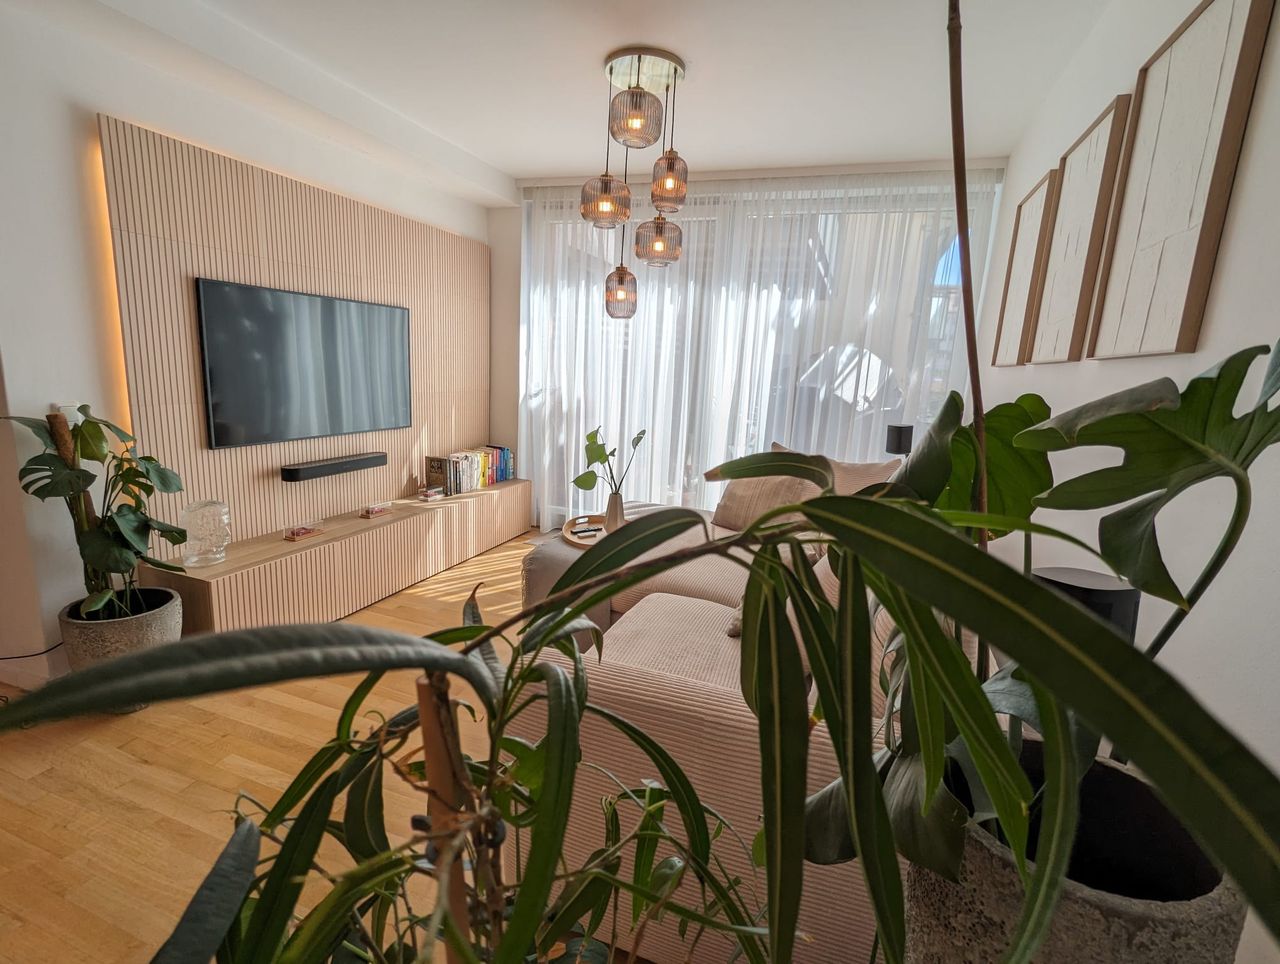 Fully furnished apartment with balcony in prime location near Stachus